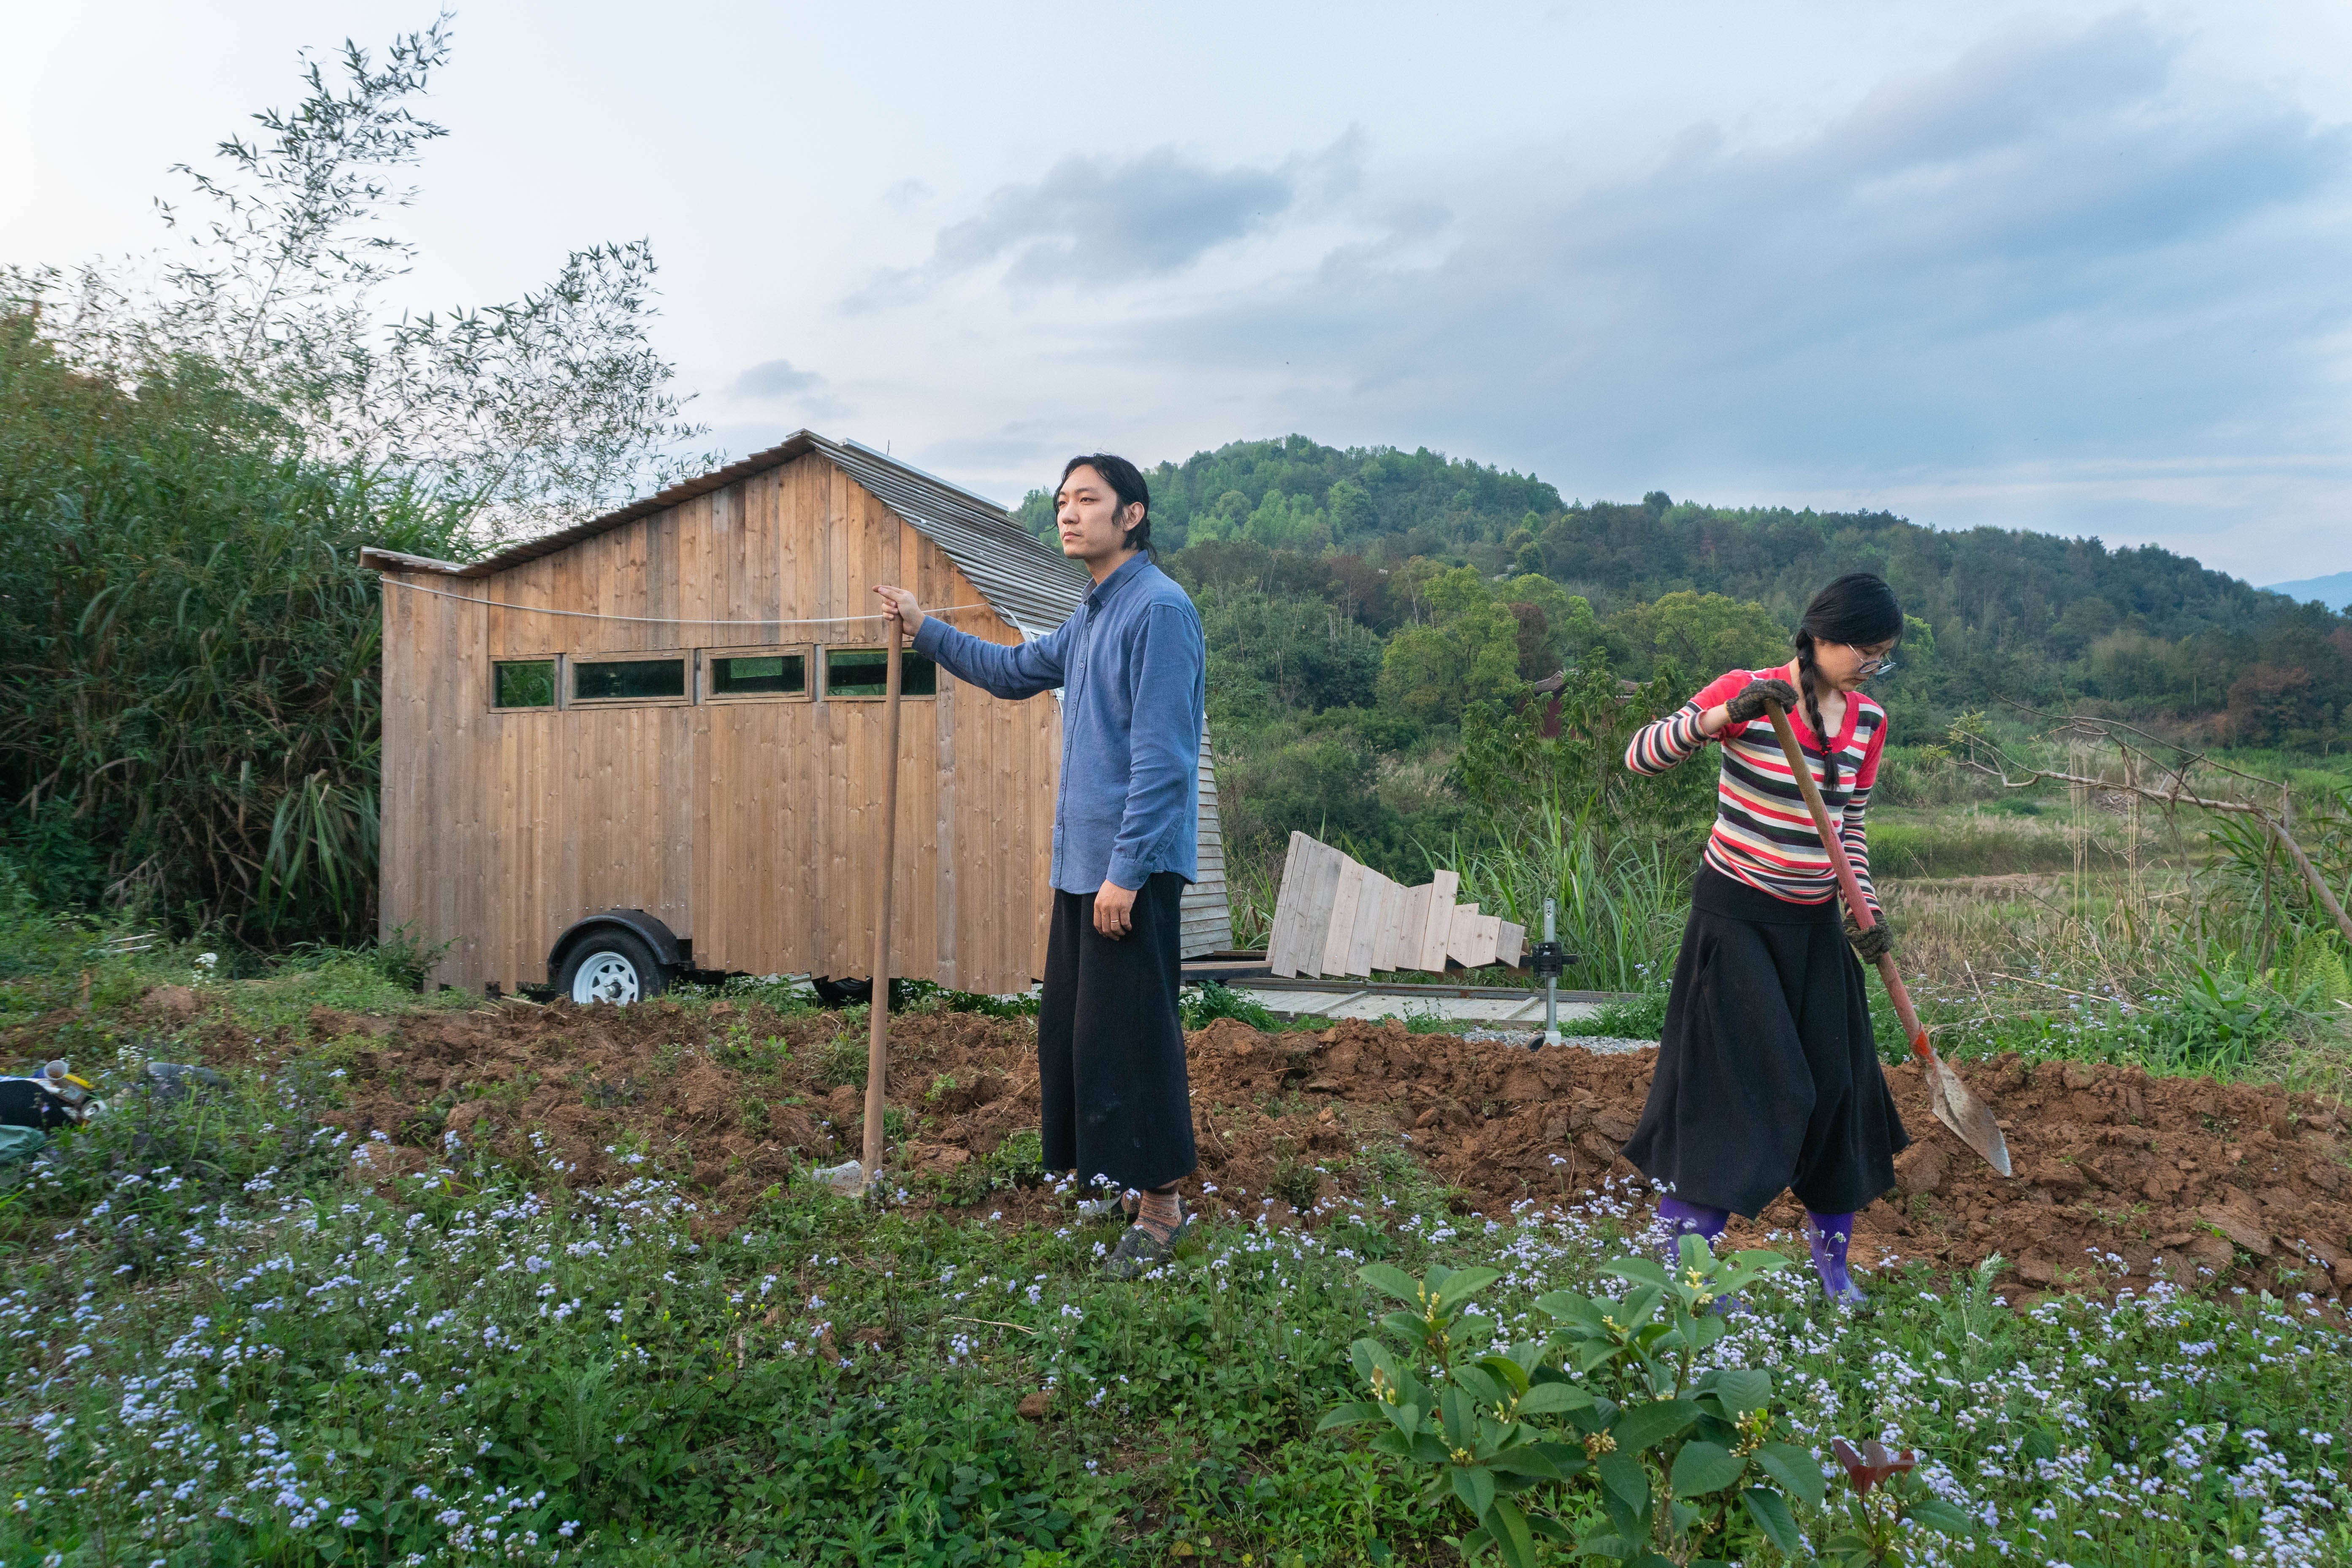 Tang Guanhua and Xing Zhen at Another Community, a commune in China’s Fujian province. Photo: Denise Hruby